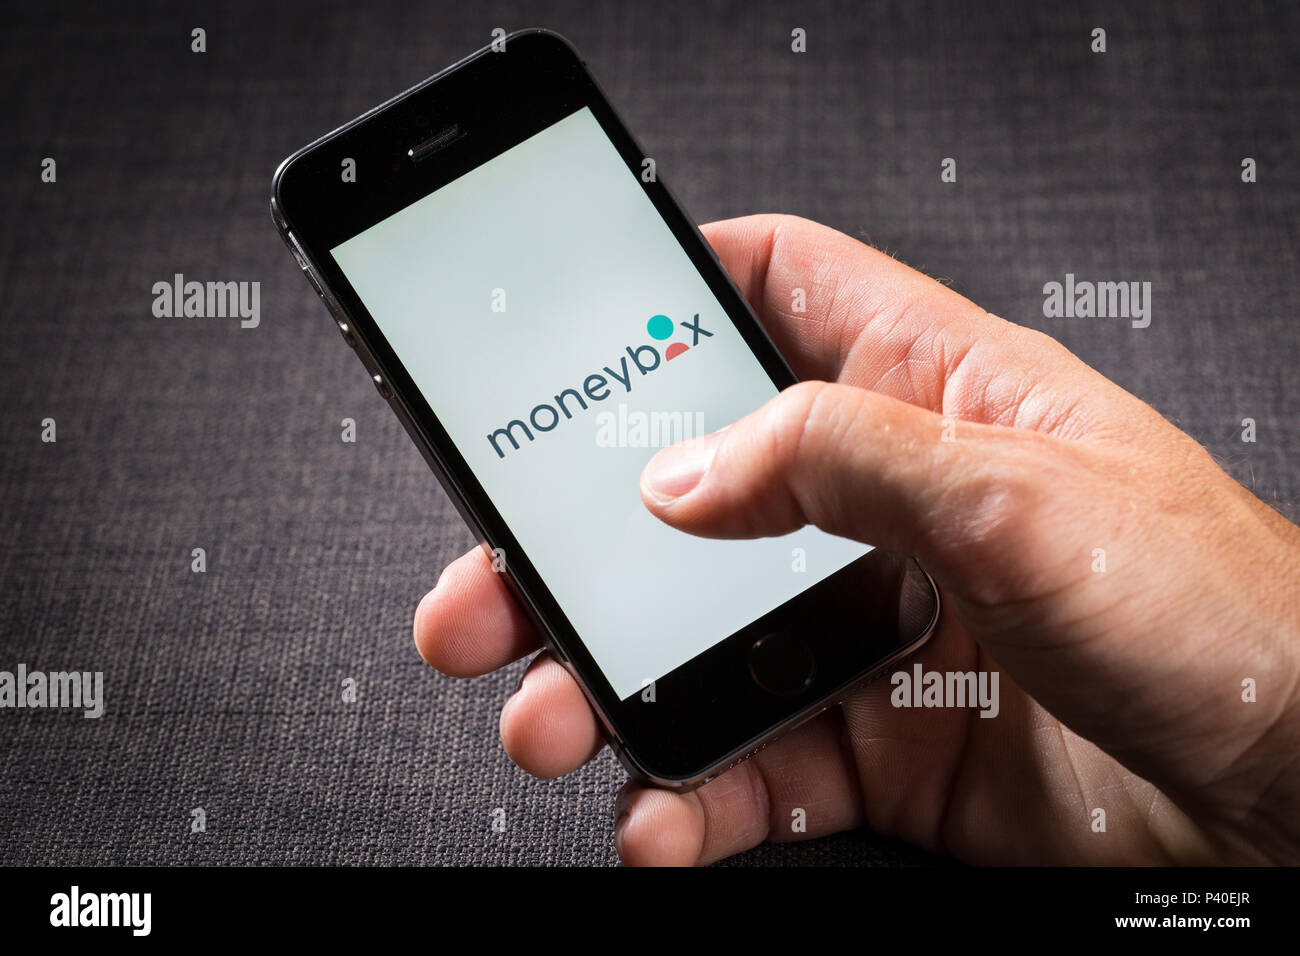 Moneybox investment App on an iPhone smartphone Stock Photo